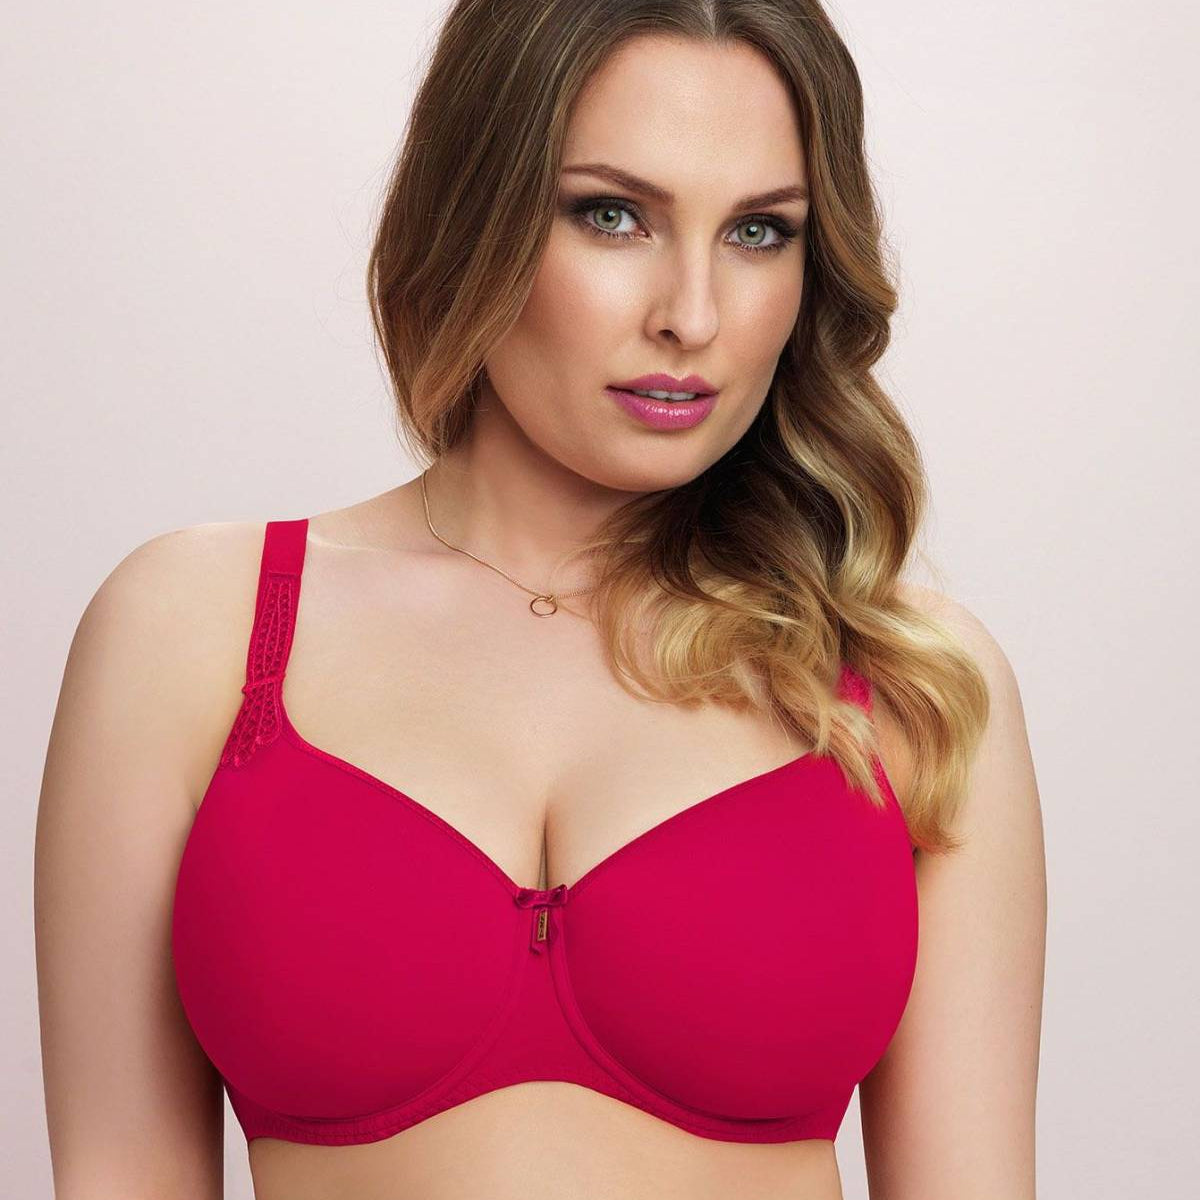 Maidenform Vintage 34D Bra Lace Burgundy Plunge 3229 Cotton Conuture See  Through Size undefined - $25 - From Anne